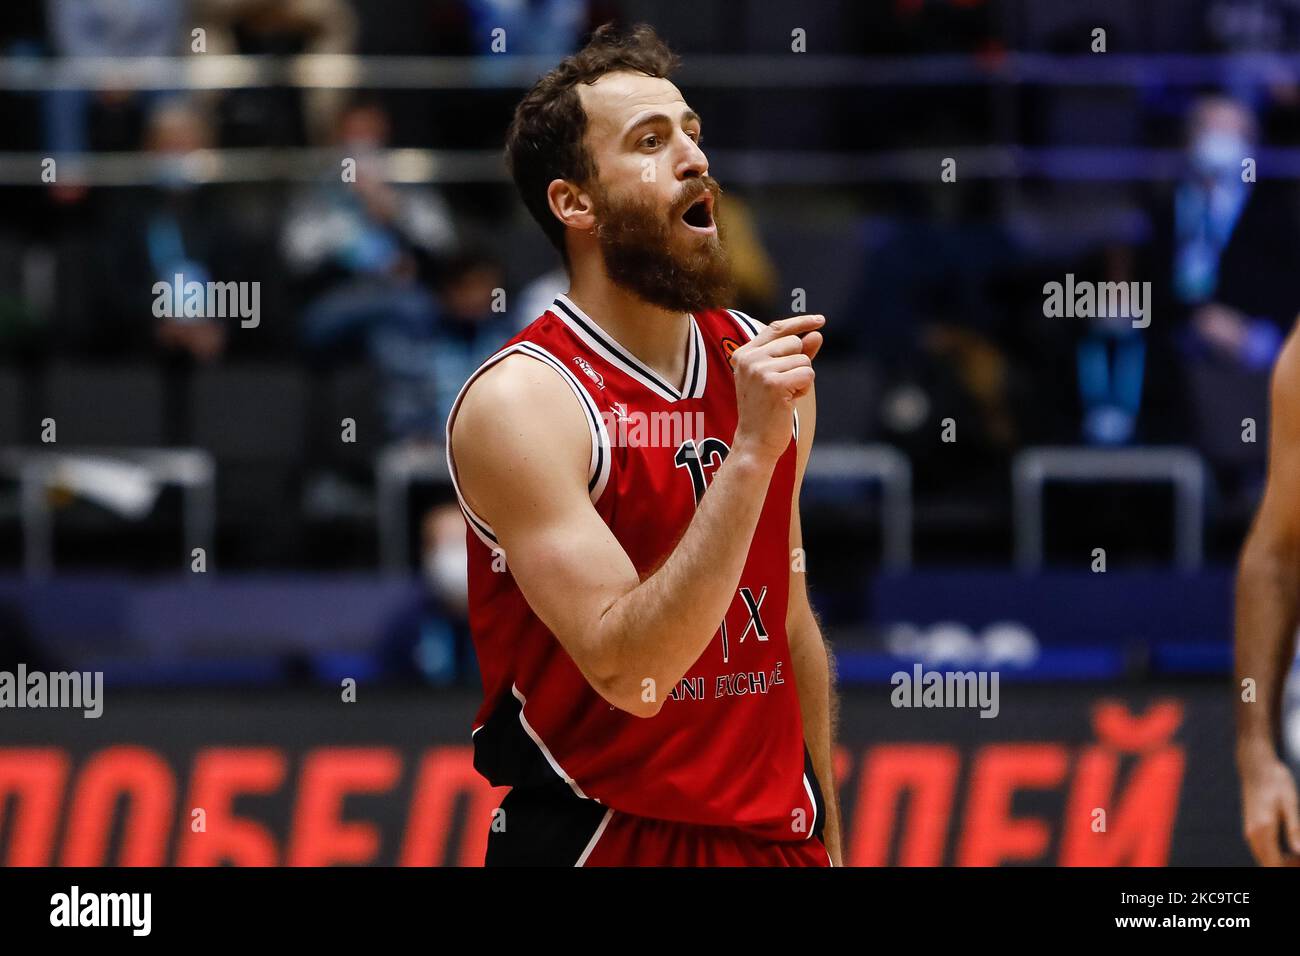 Sergio Rodriguez of Milan gestures during the EuroLeague Basketball match  between Zenit St. Petersburg and AX Armani Exchange Milan on February 22,  2020 at Sibur Arena in Saint Petersburg, Russia. (Photo by